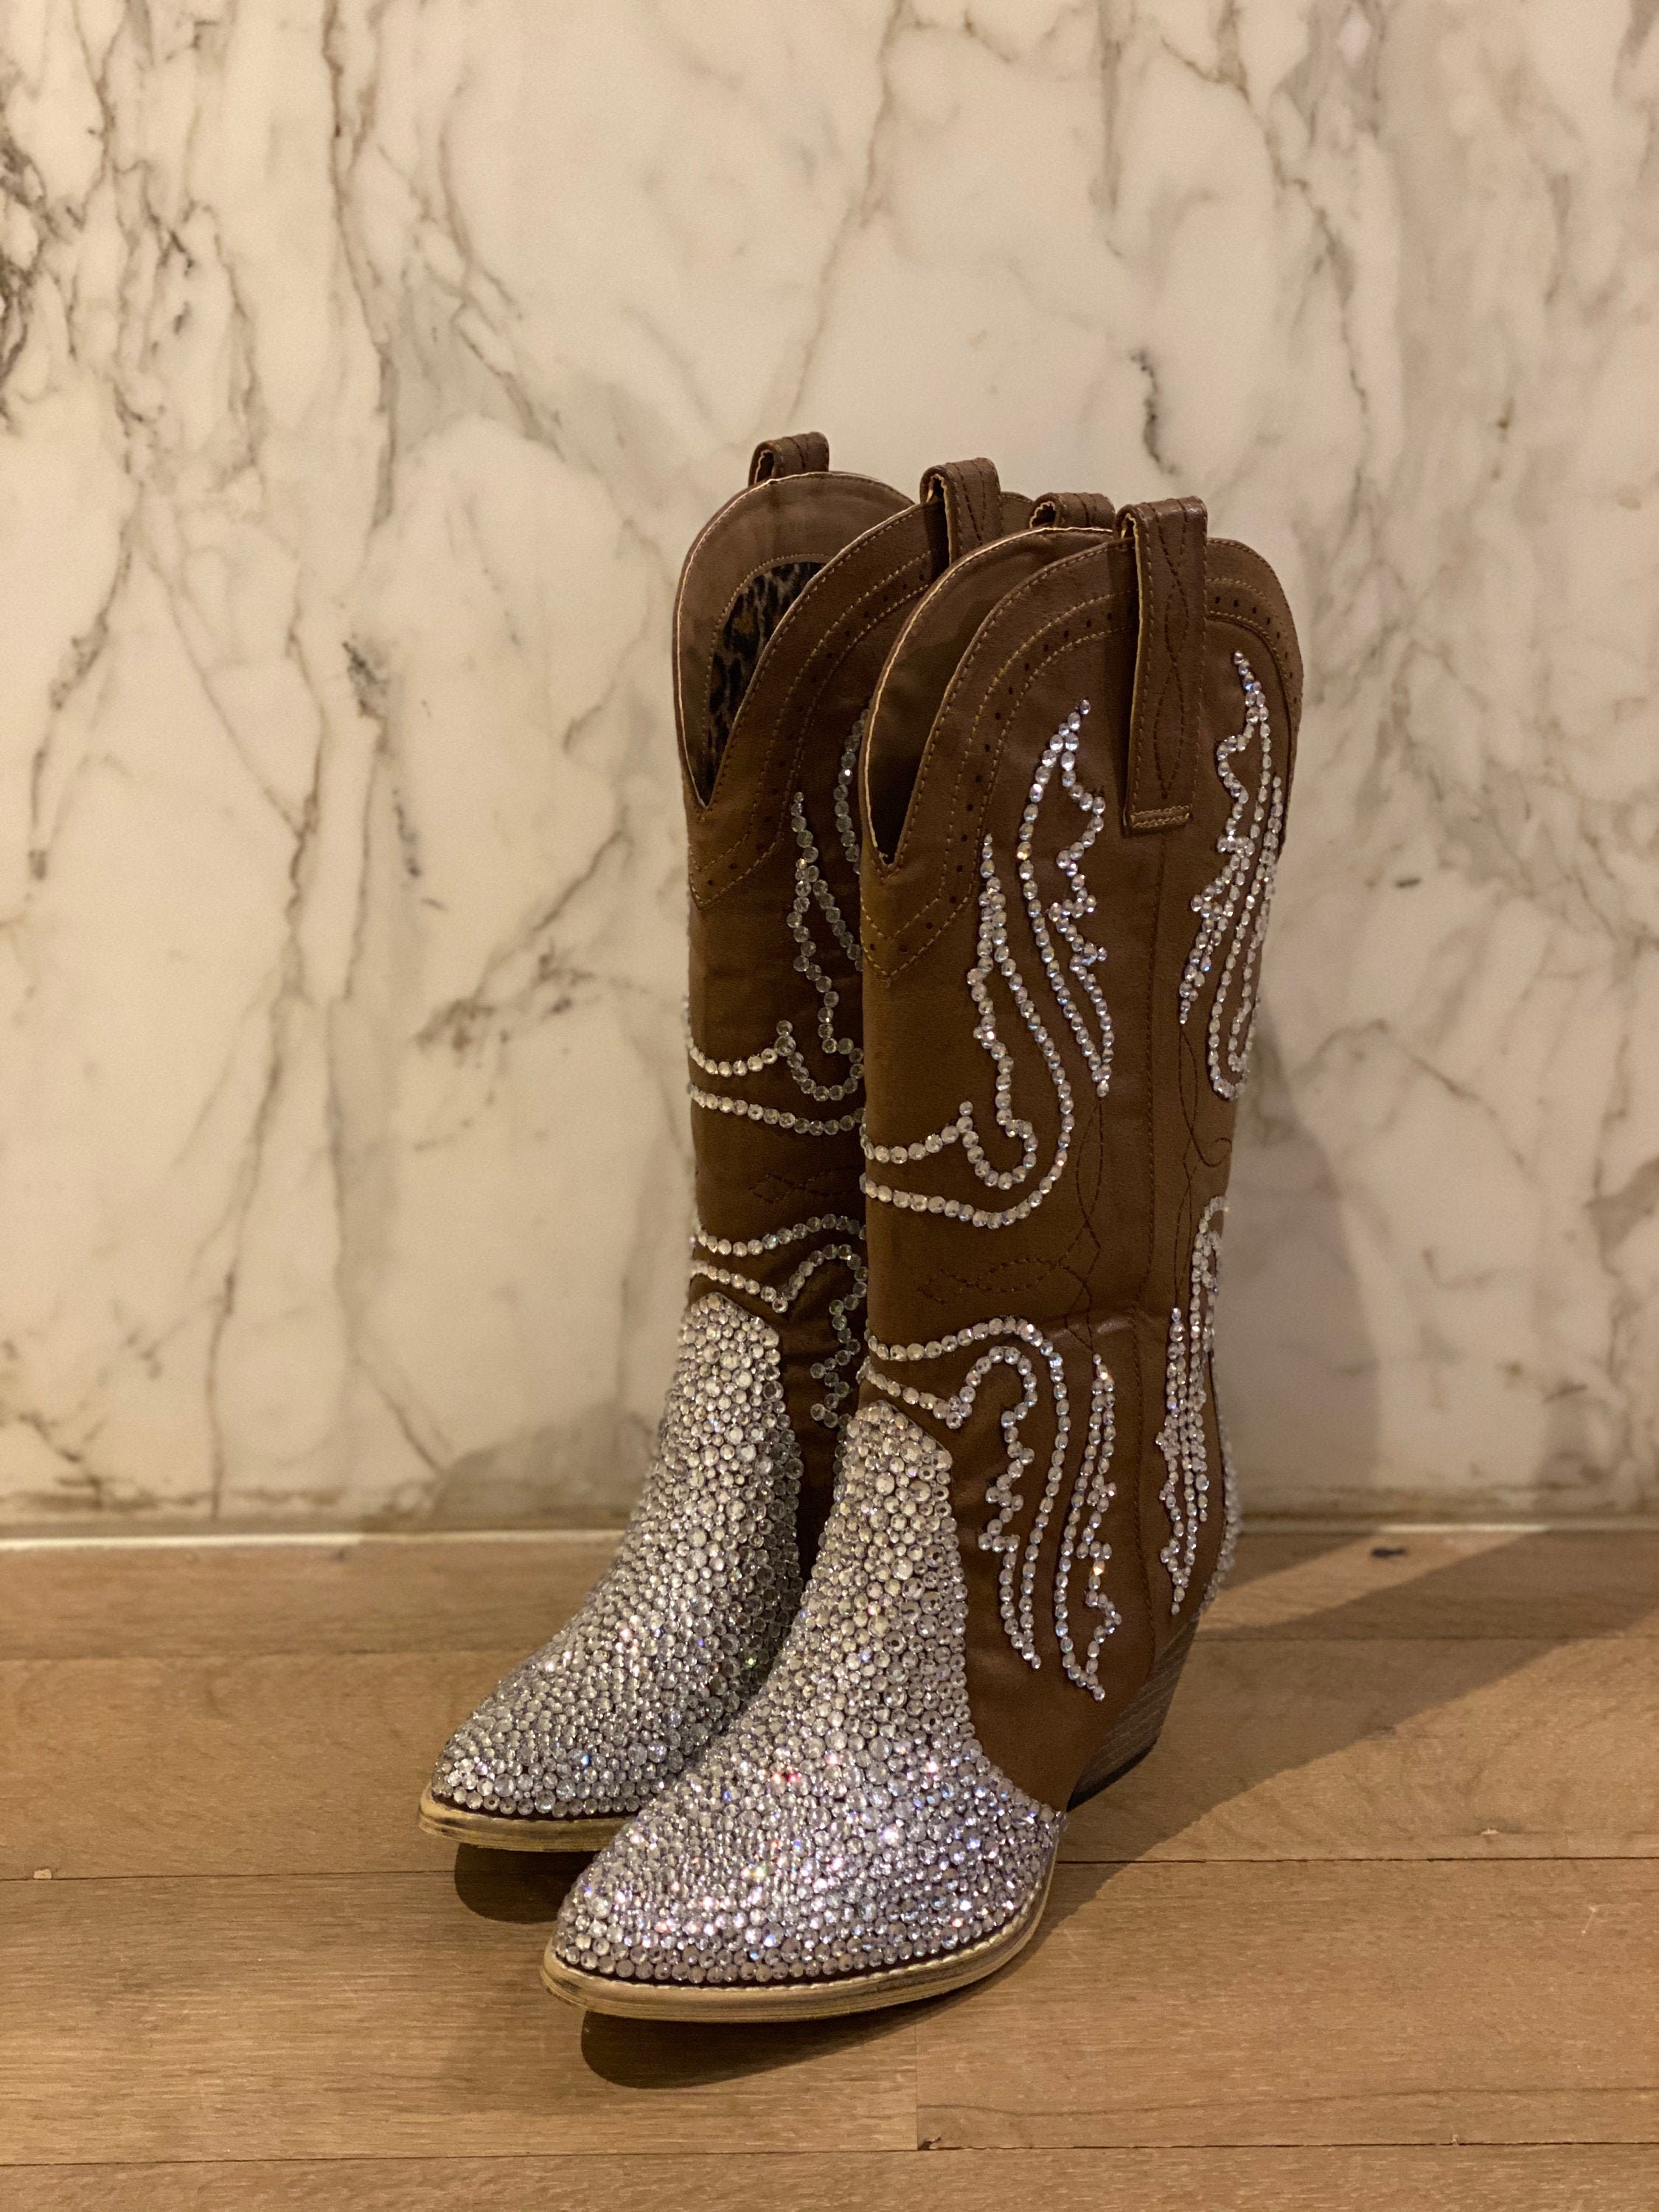 SaraIris Women's Vintage Cowgirl Boots Chunky Block Heel Embroidery Glitter Rhinestone Mid Calf Boots Pull-on Knight Western Cowboy Boots 